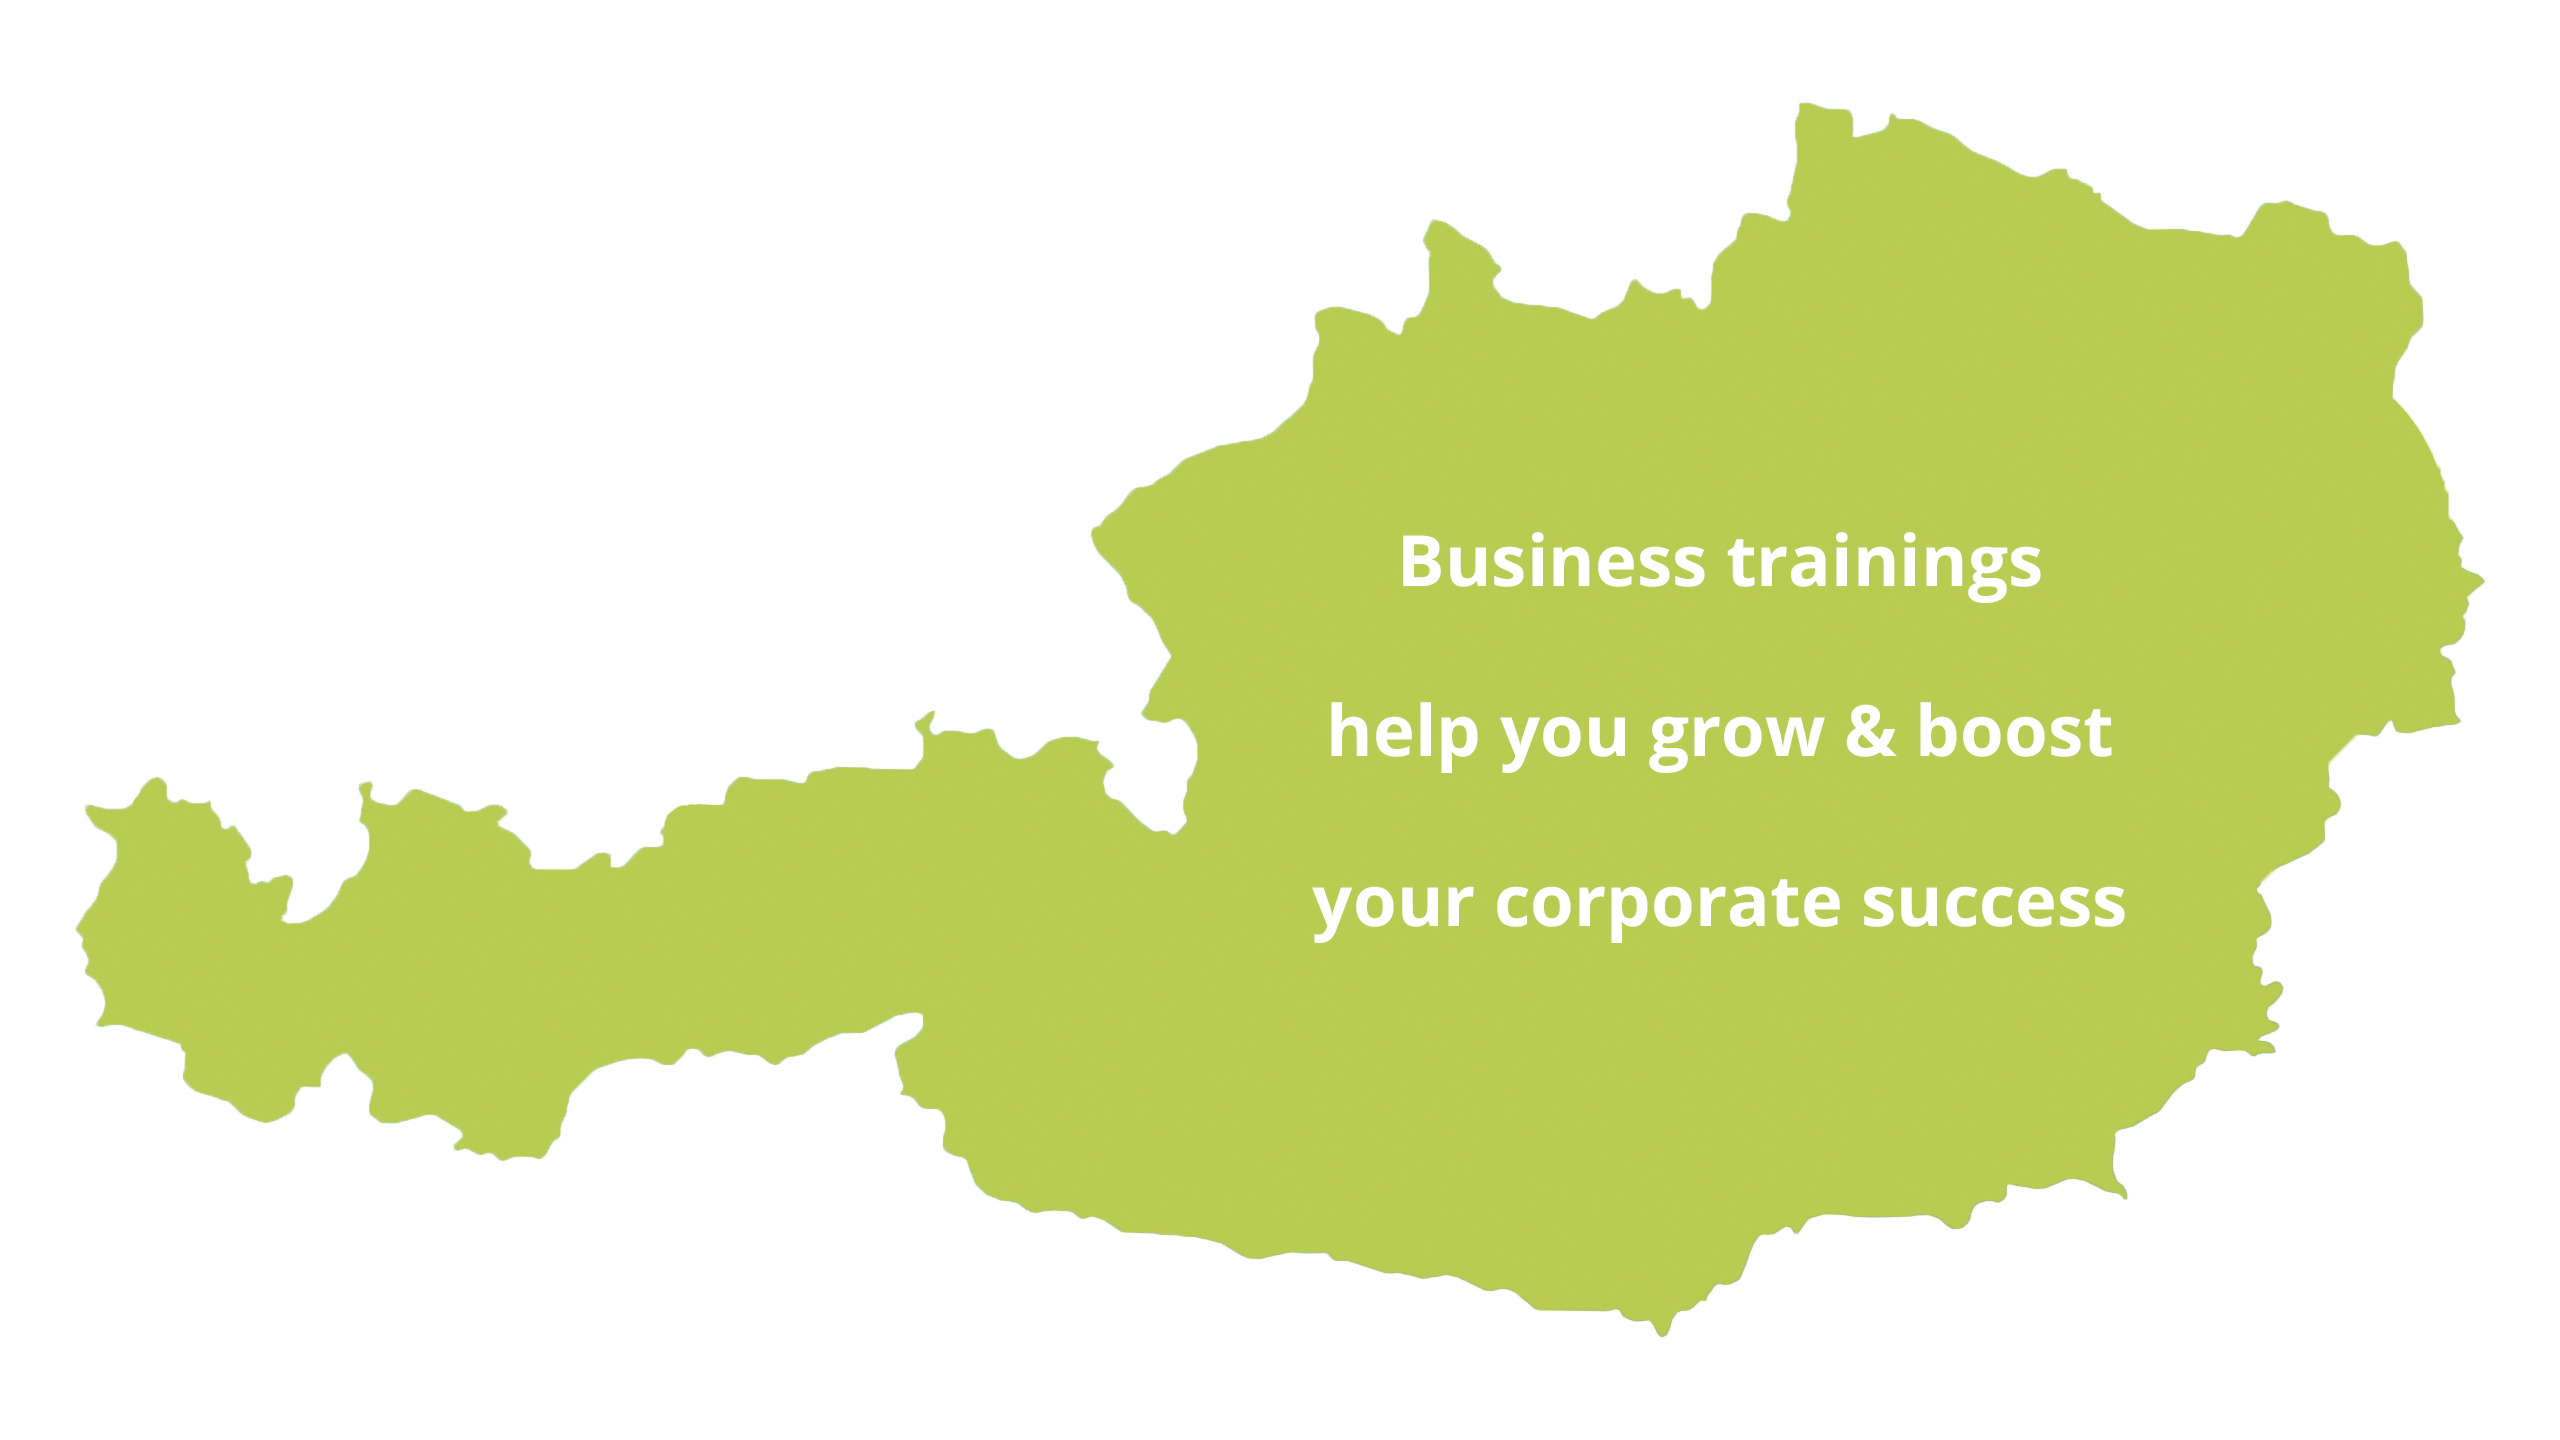 Business Trainings help you boost your corporate success